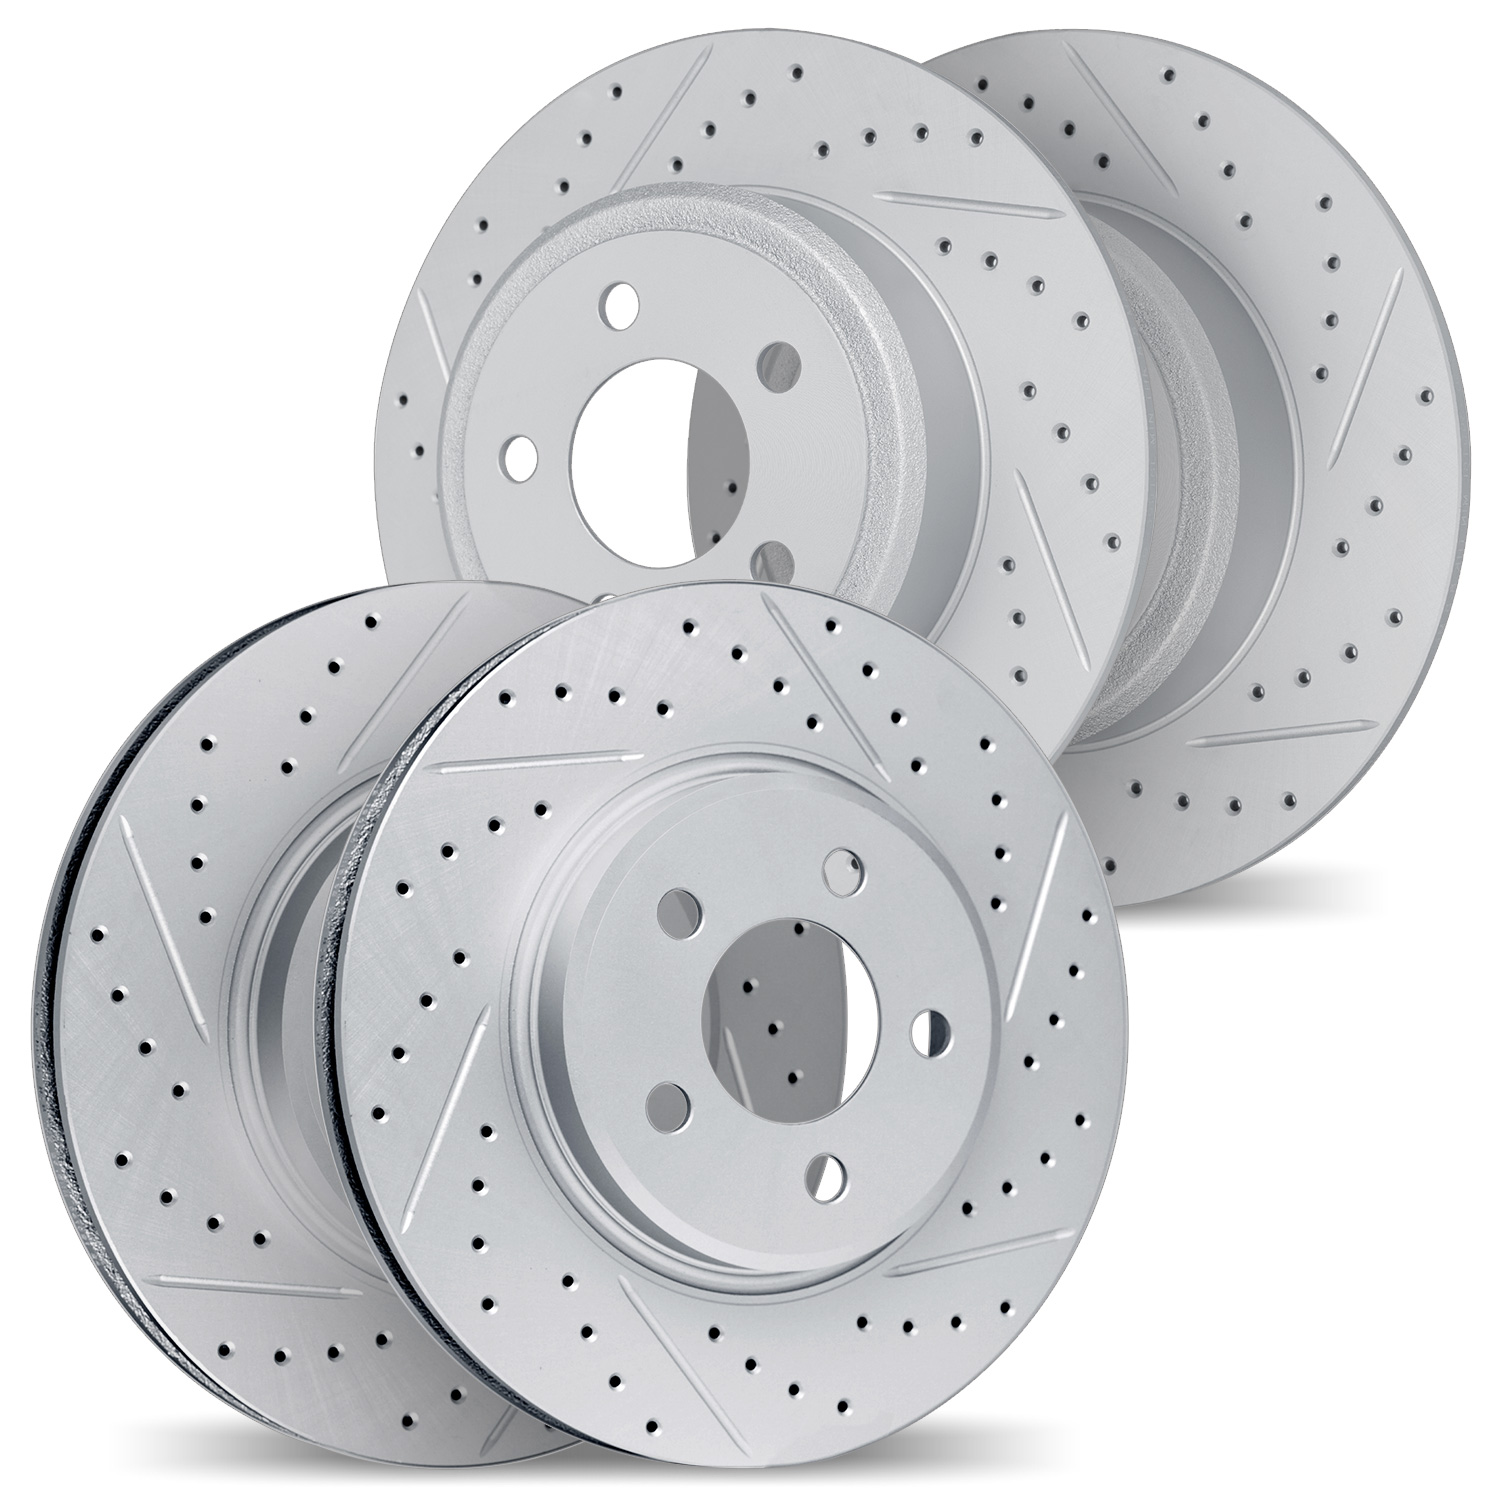 2004-45004 Geoperformance Drilled/Slotted Brake Rotors, Fits Select GM, Position: Front and Rear